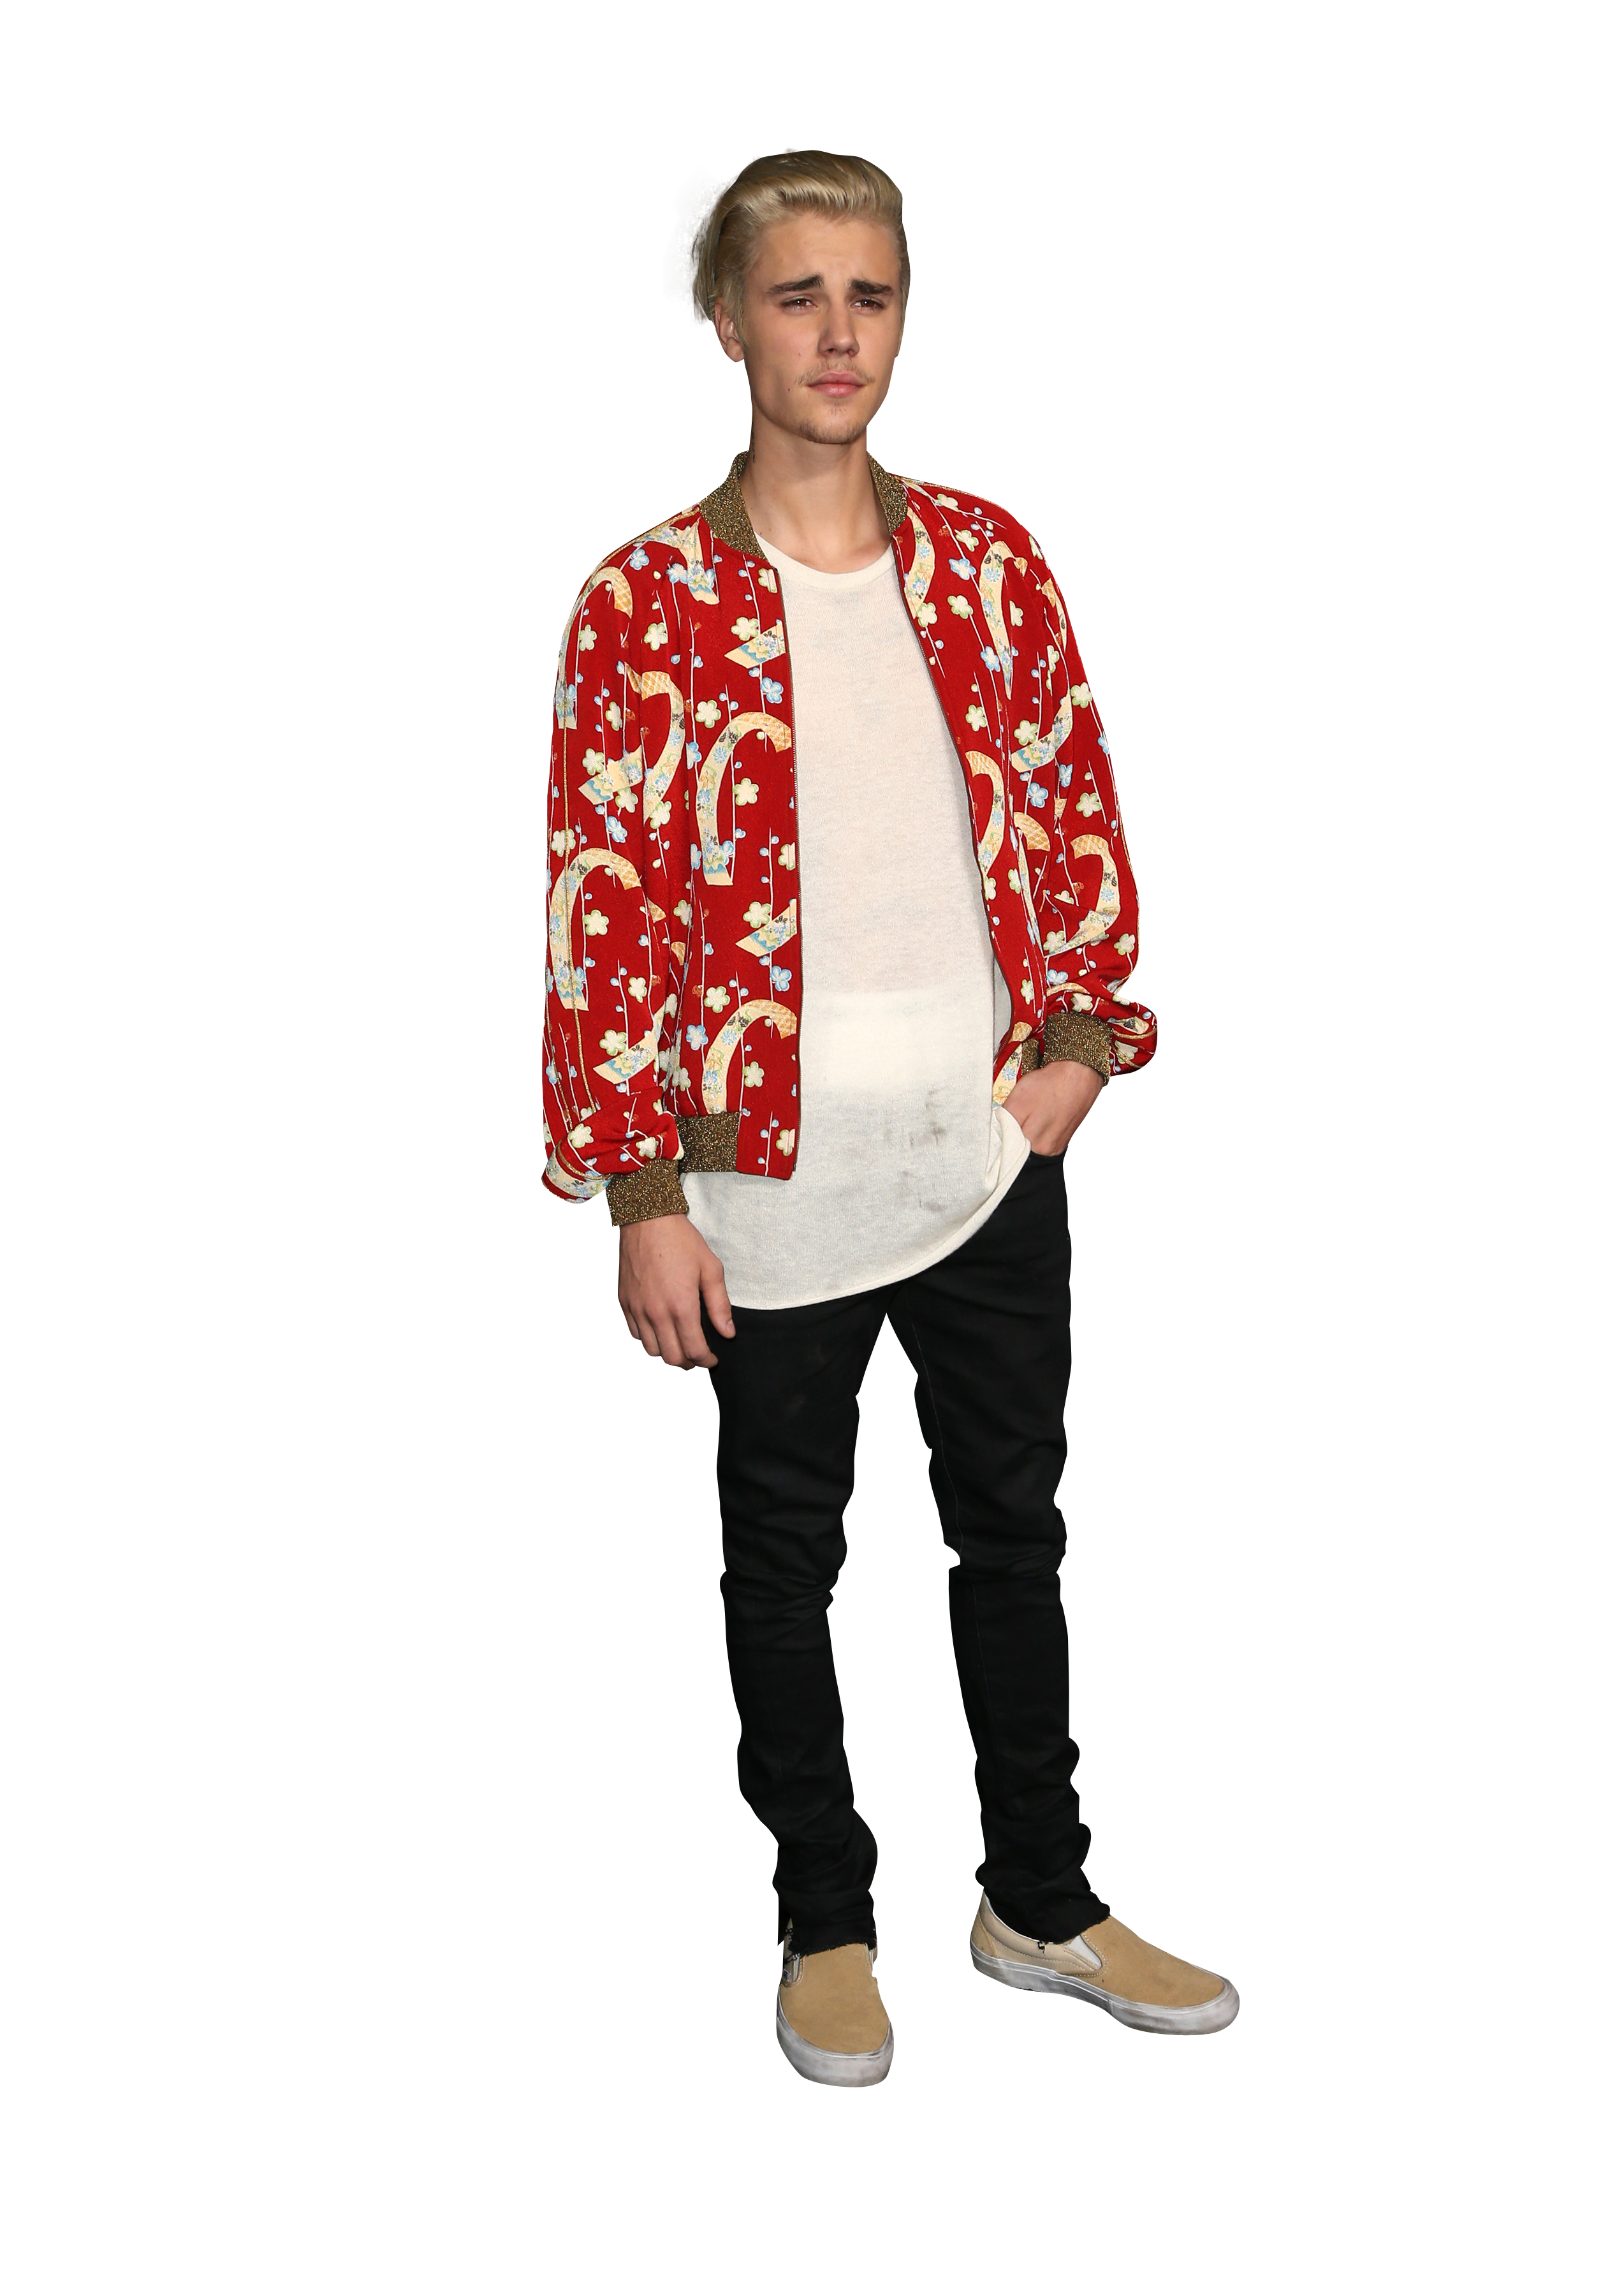 Justin Bieber dressed in a Red Shirt PNG Image